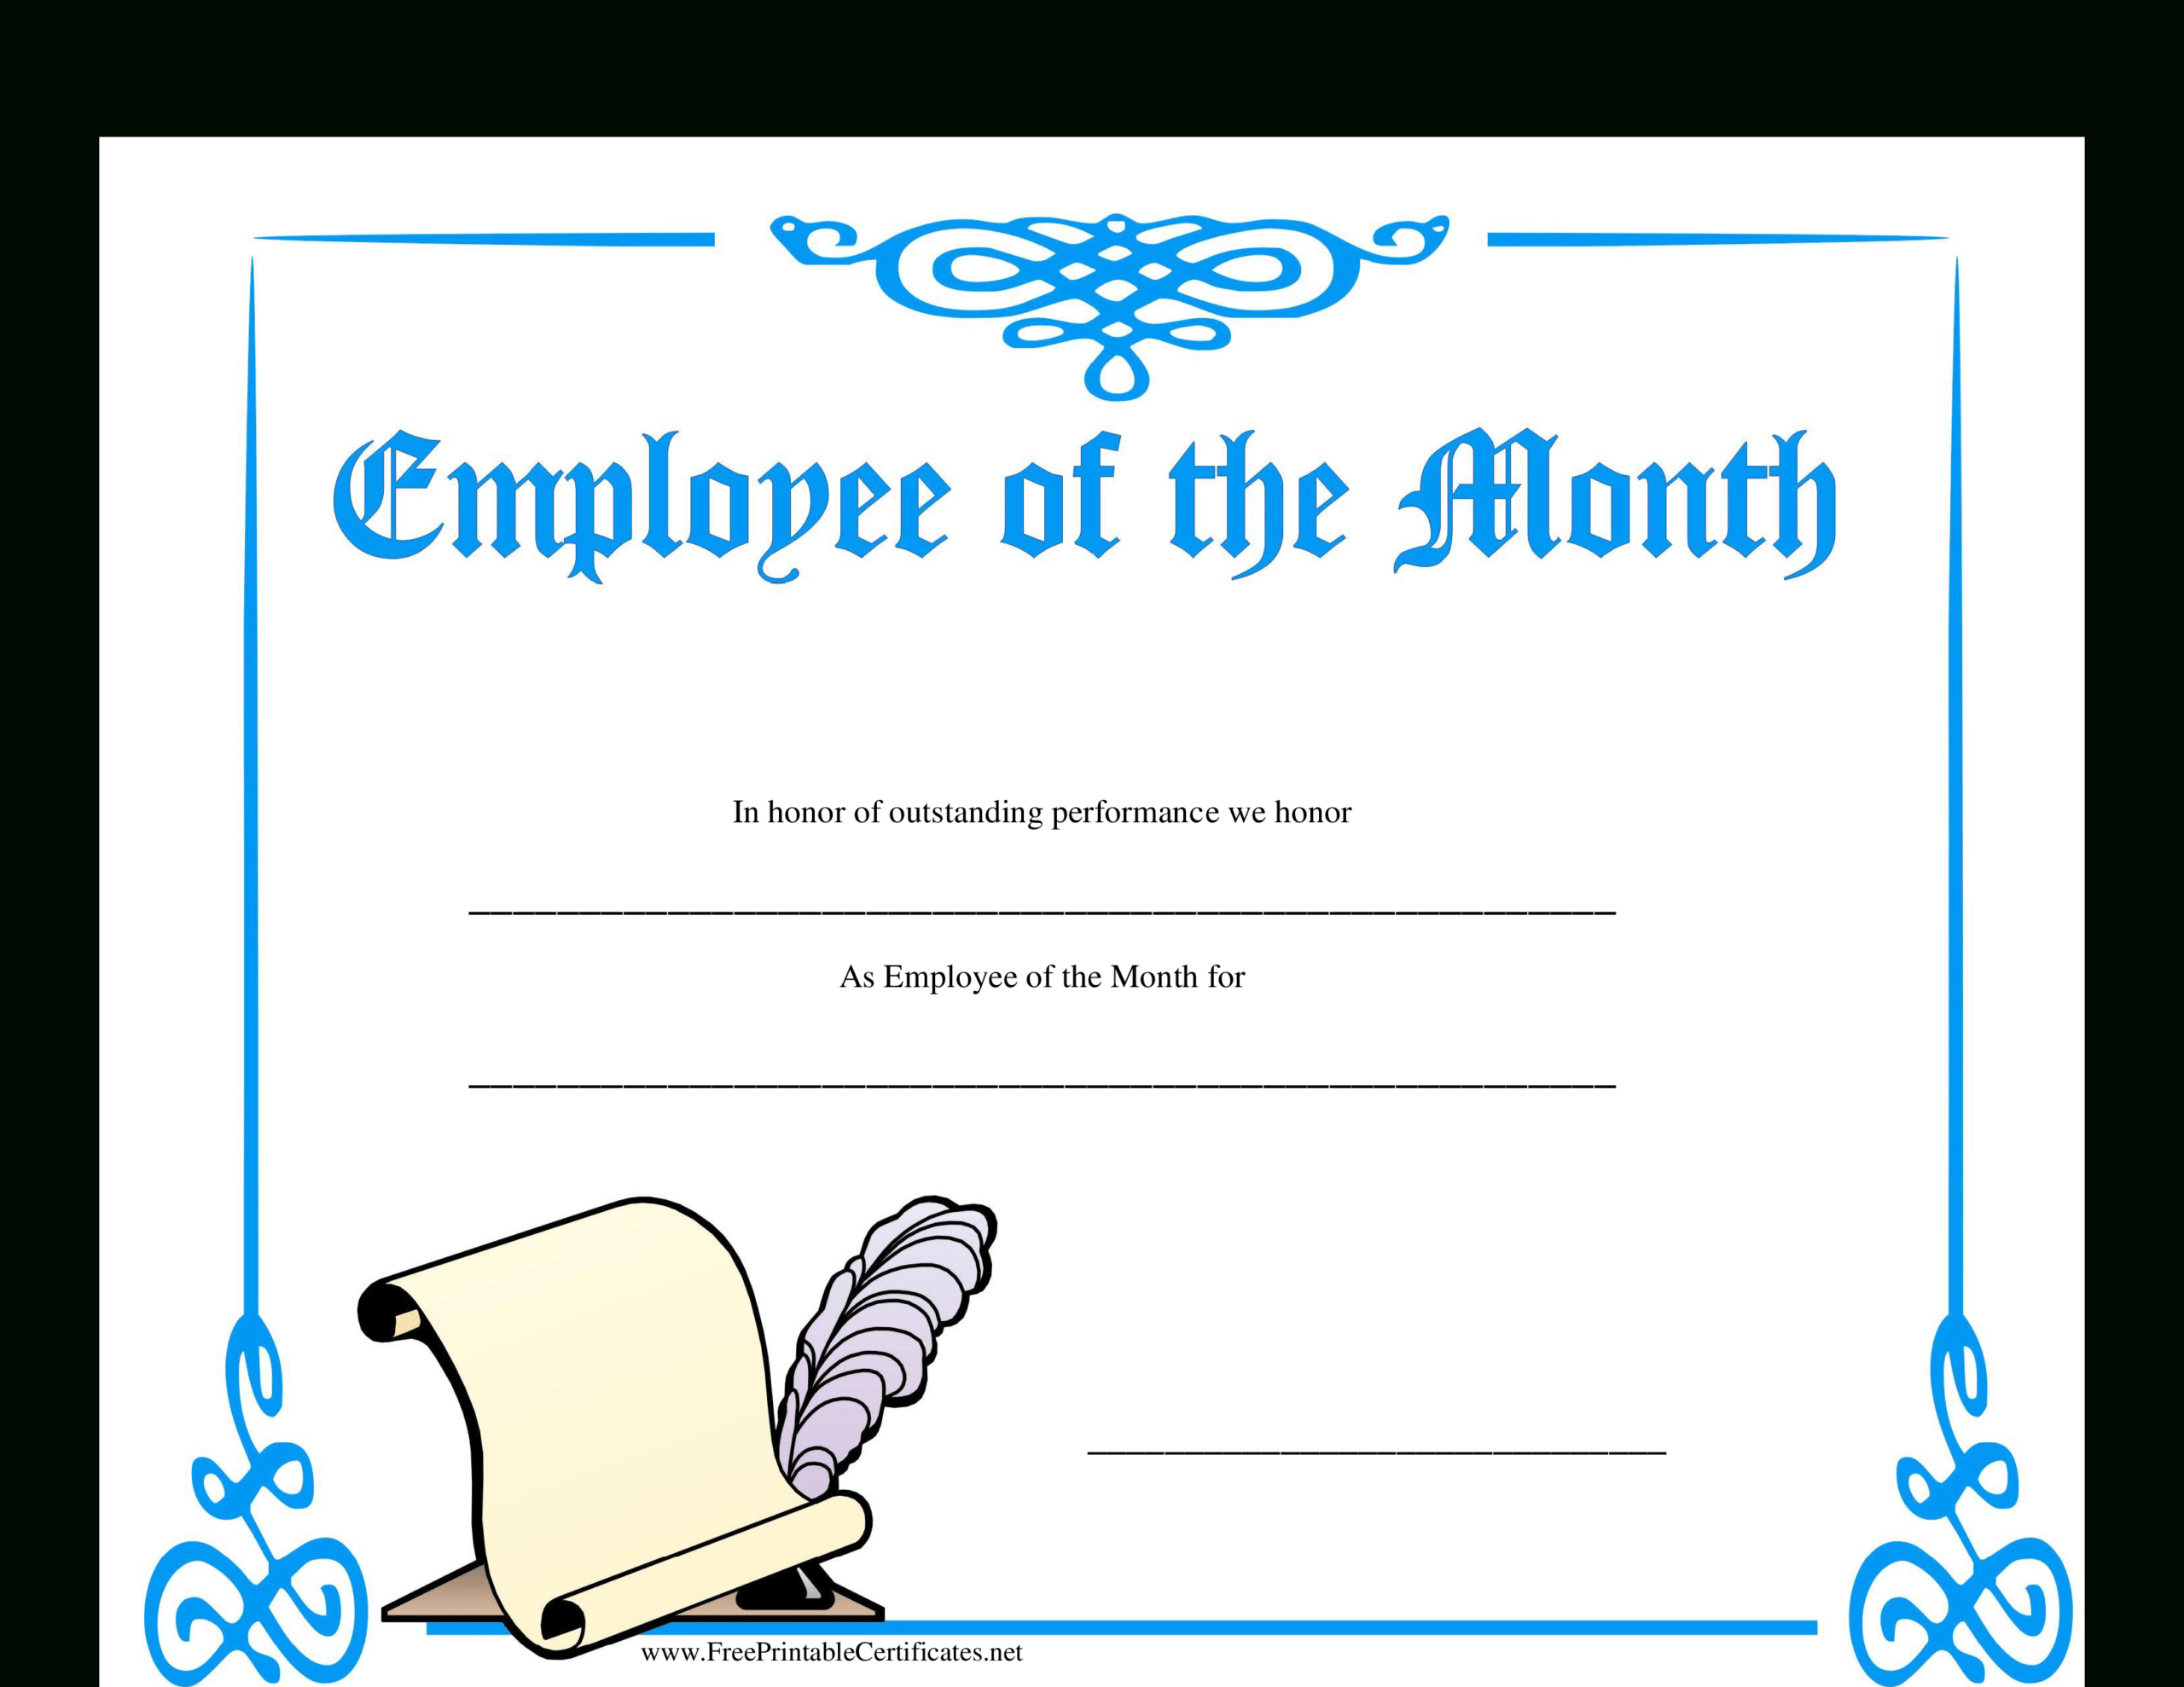 Employee Of The Month Certificate | Templates At For Employee Of The Month Certificate Template With Picture